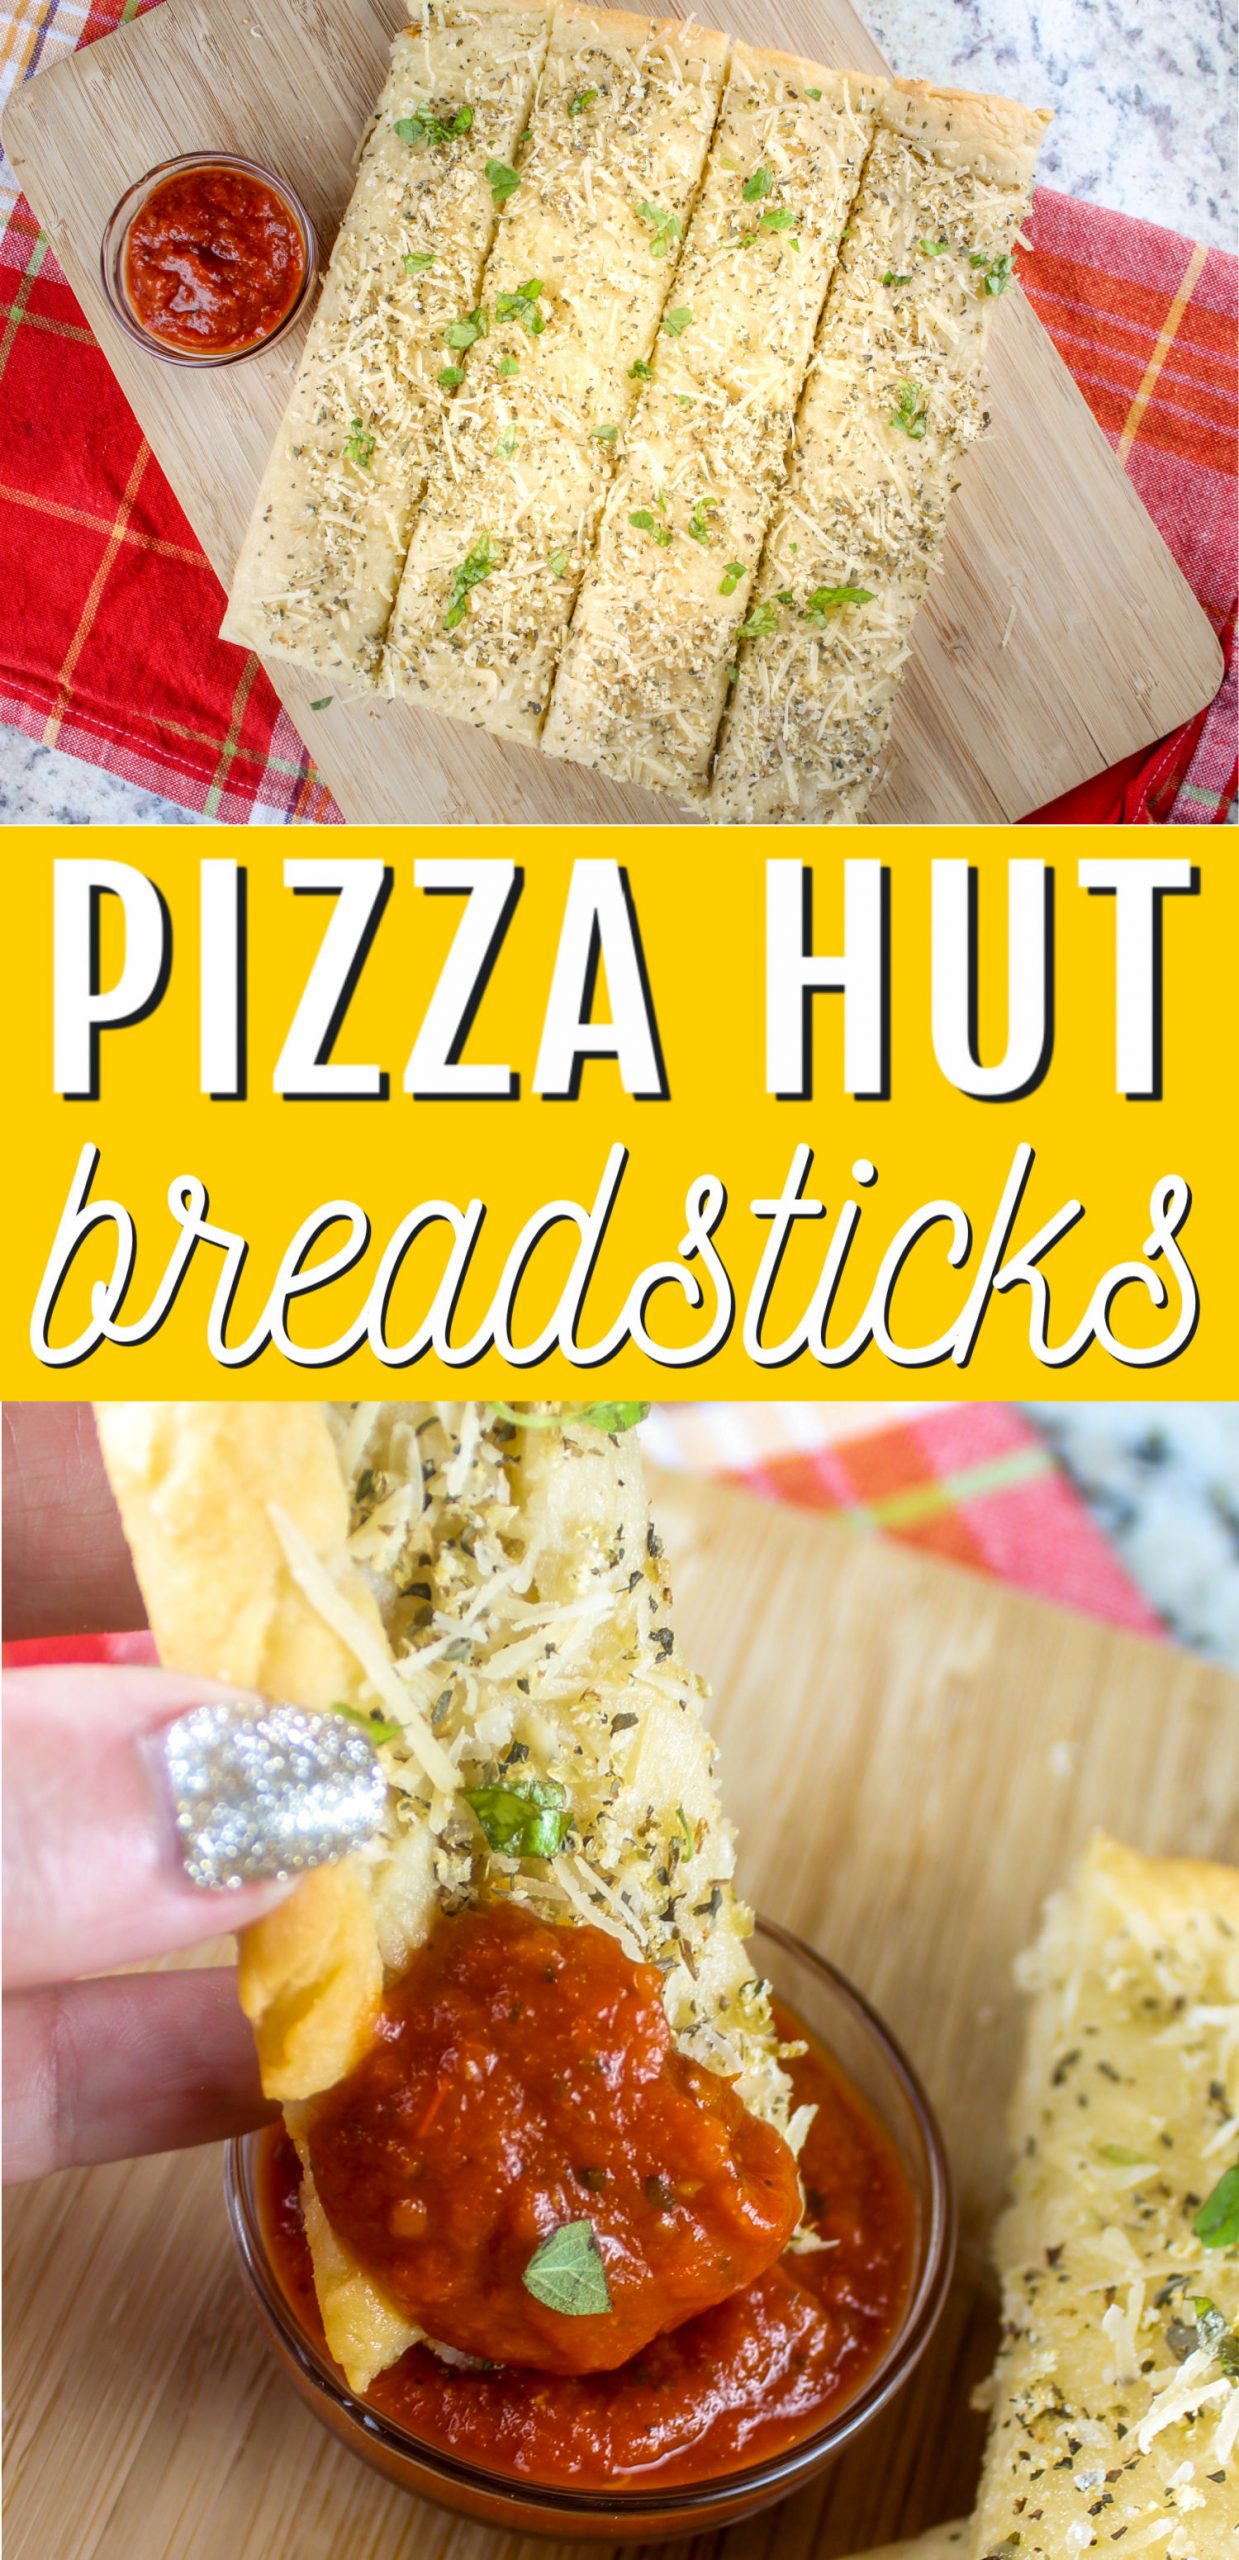 Pizza Hut Breadsticks were one of my favorite appetizers growing up! I finally recreated them in my own kitchen - so delicious - just like I remembered them!  via @foodhussy